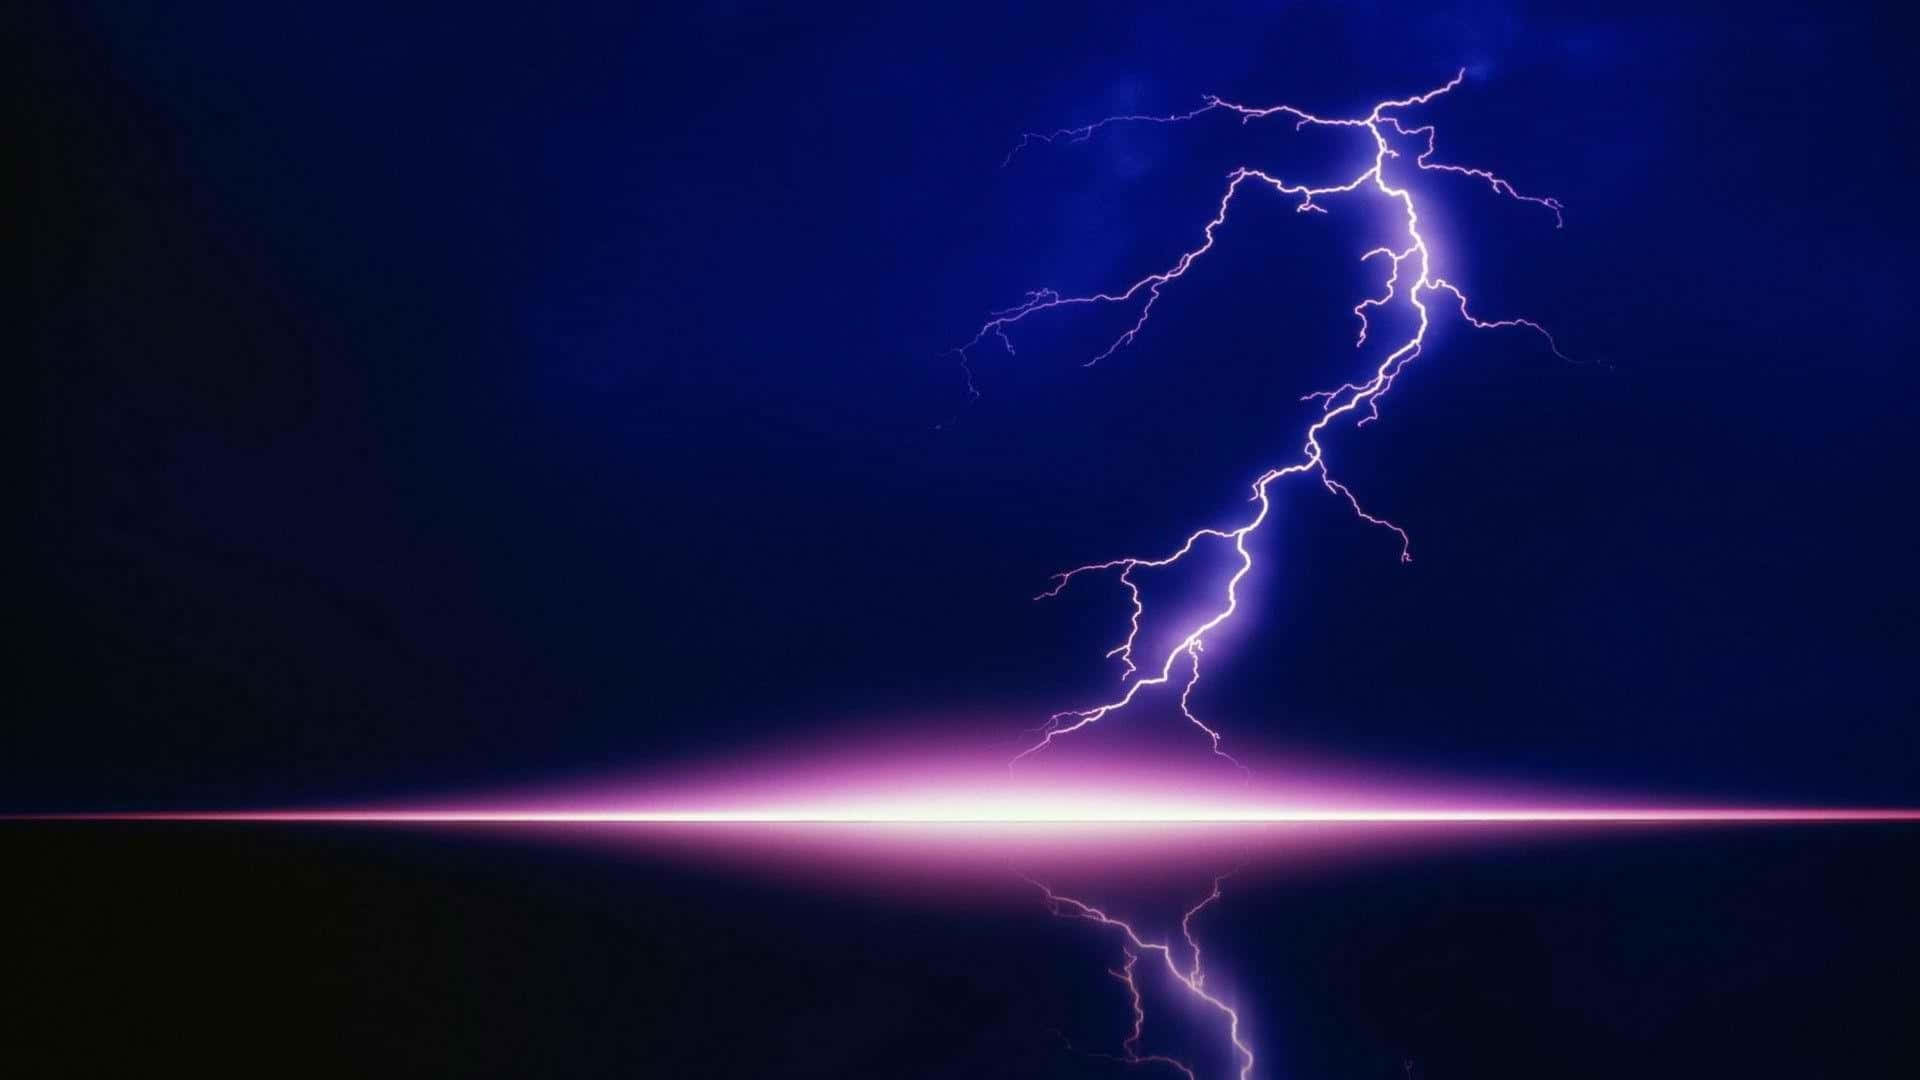 Witness The Majesty Of Blue Lightning In This Stunning Image. Background